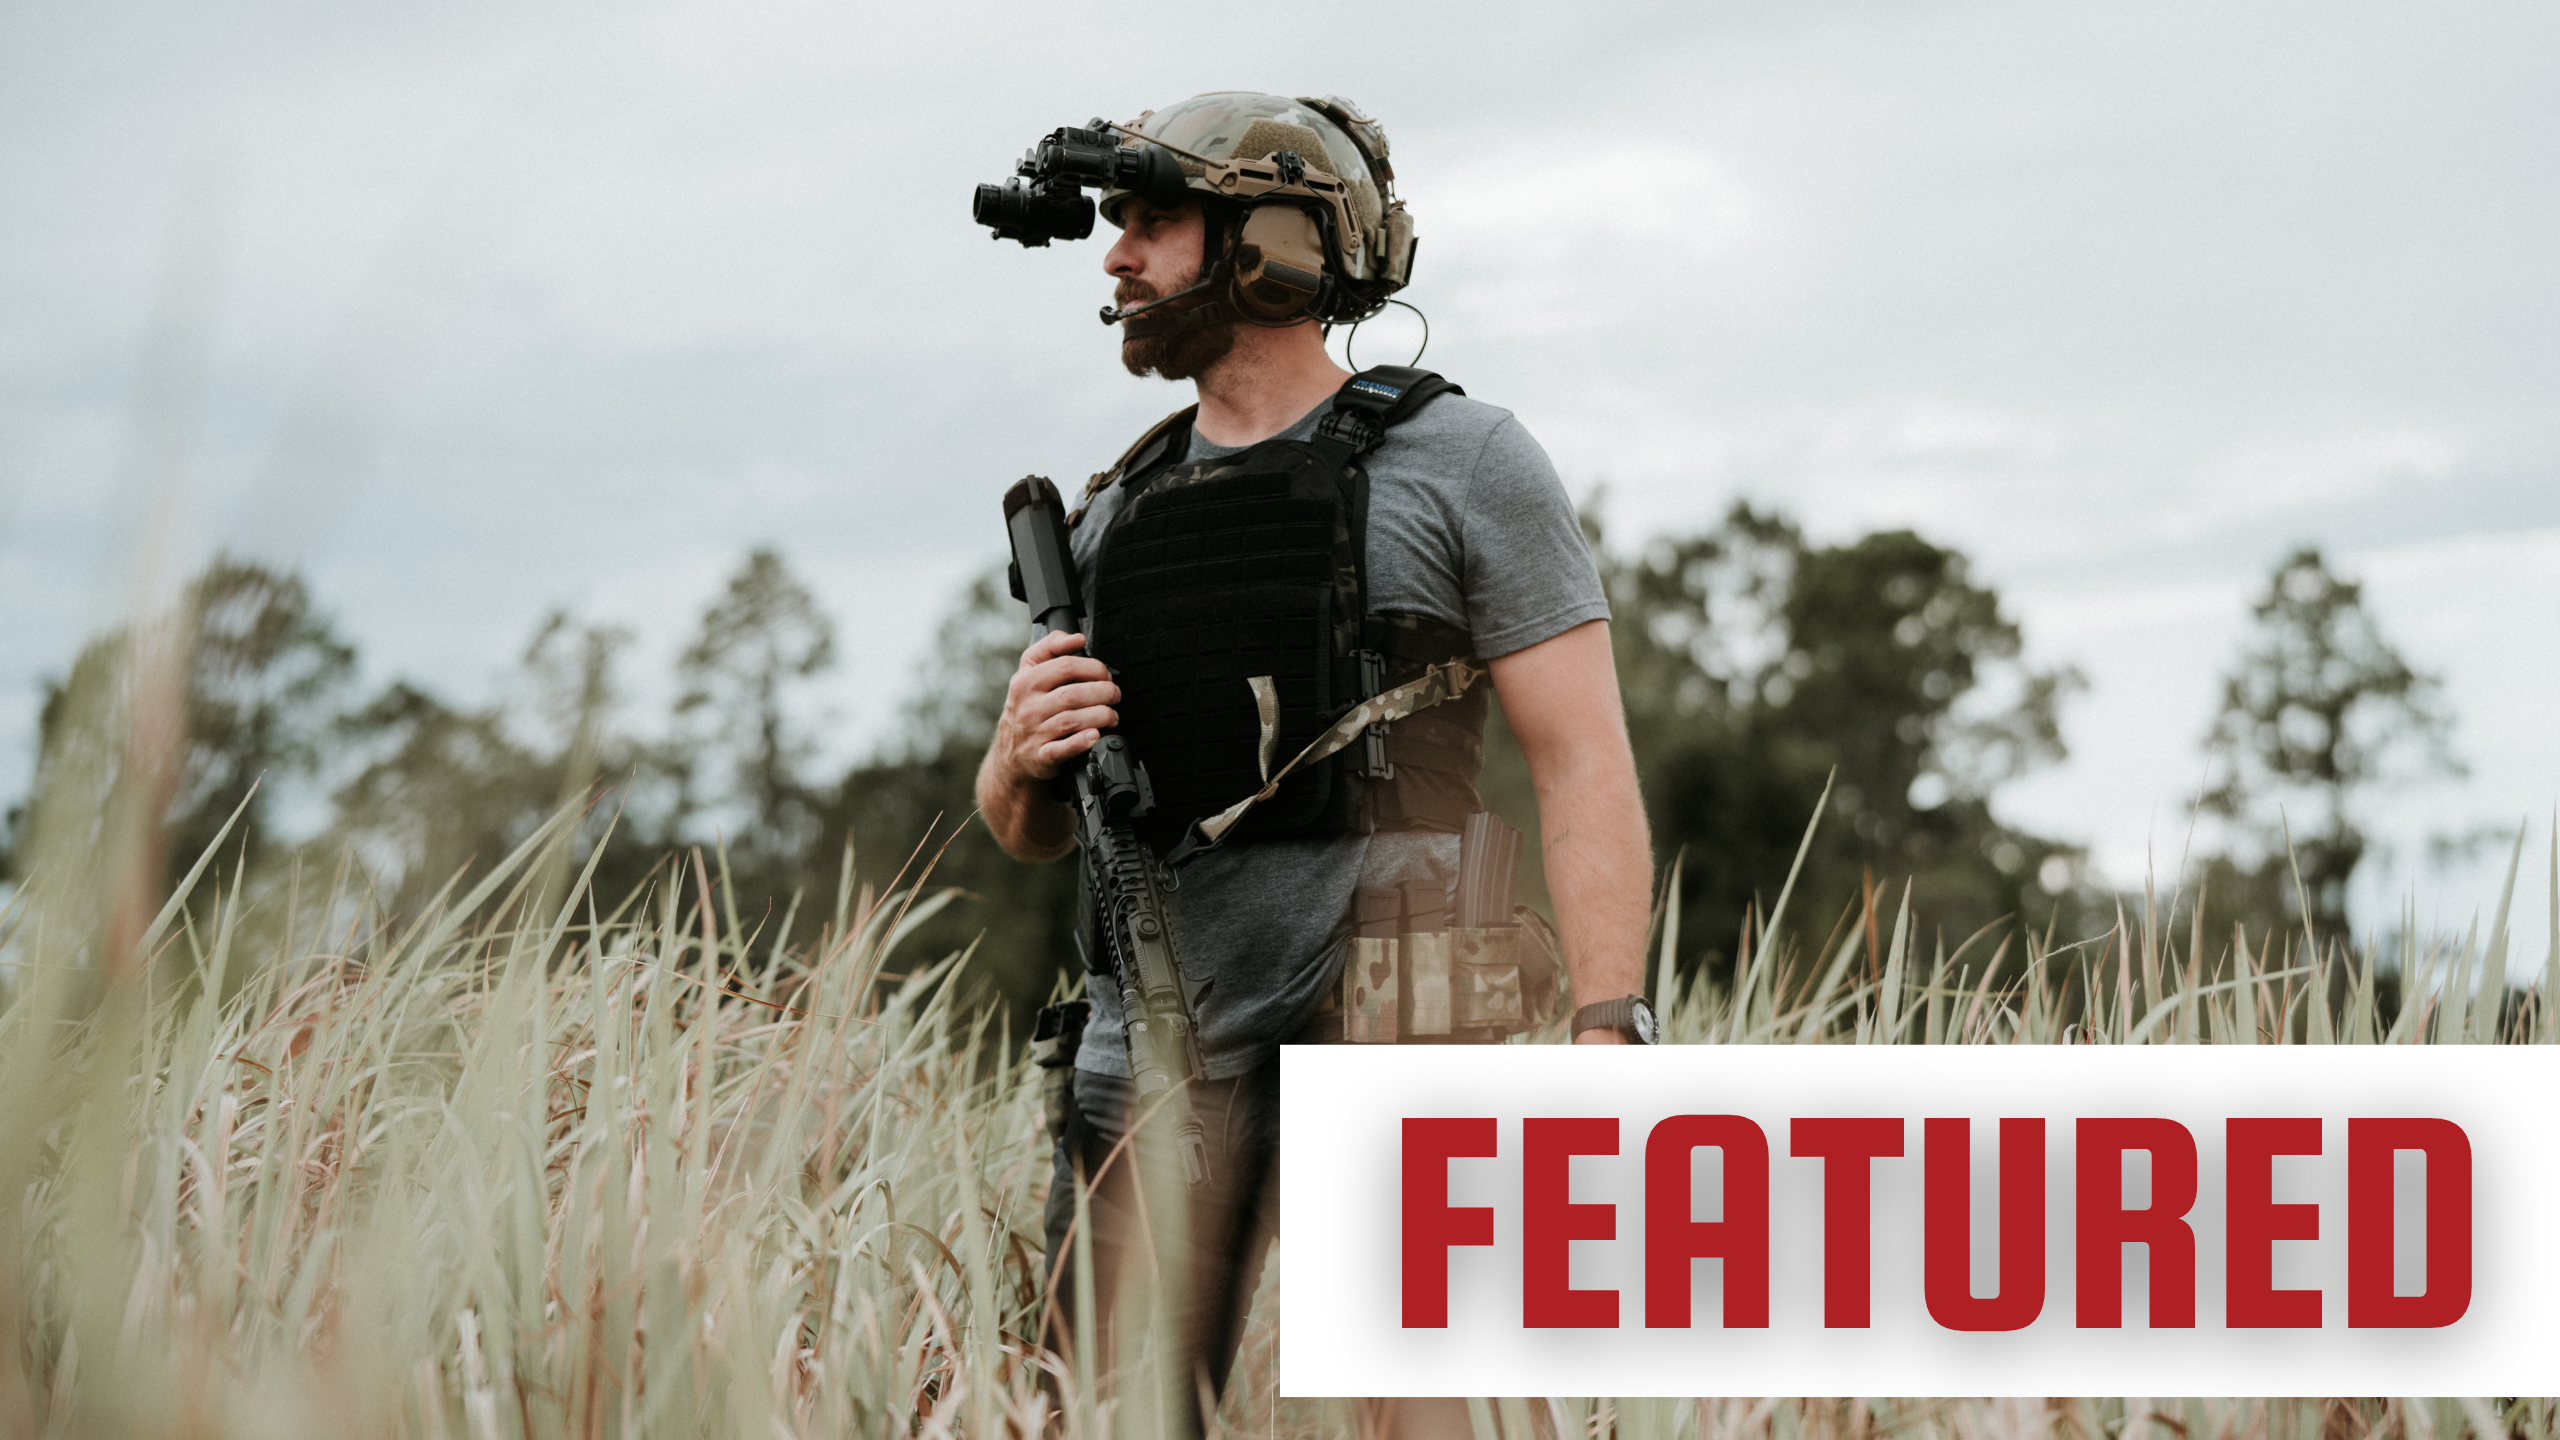 Plate Carrier Accessories - Combat Systems